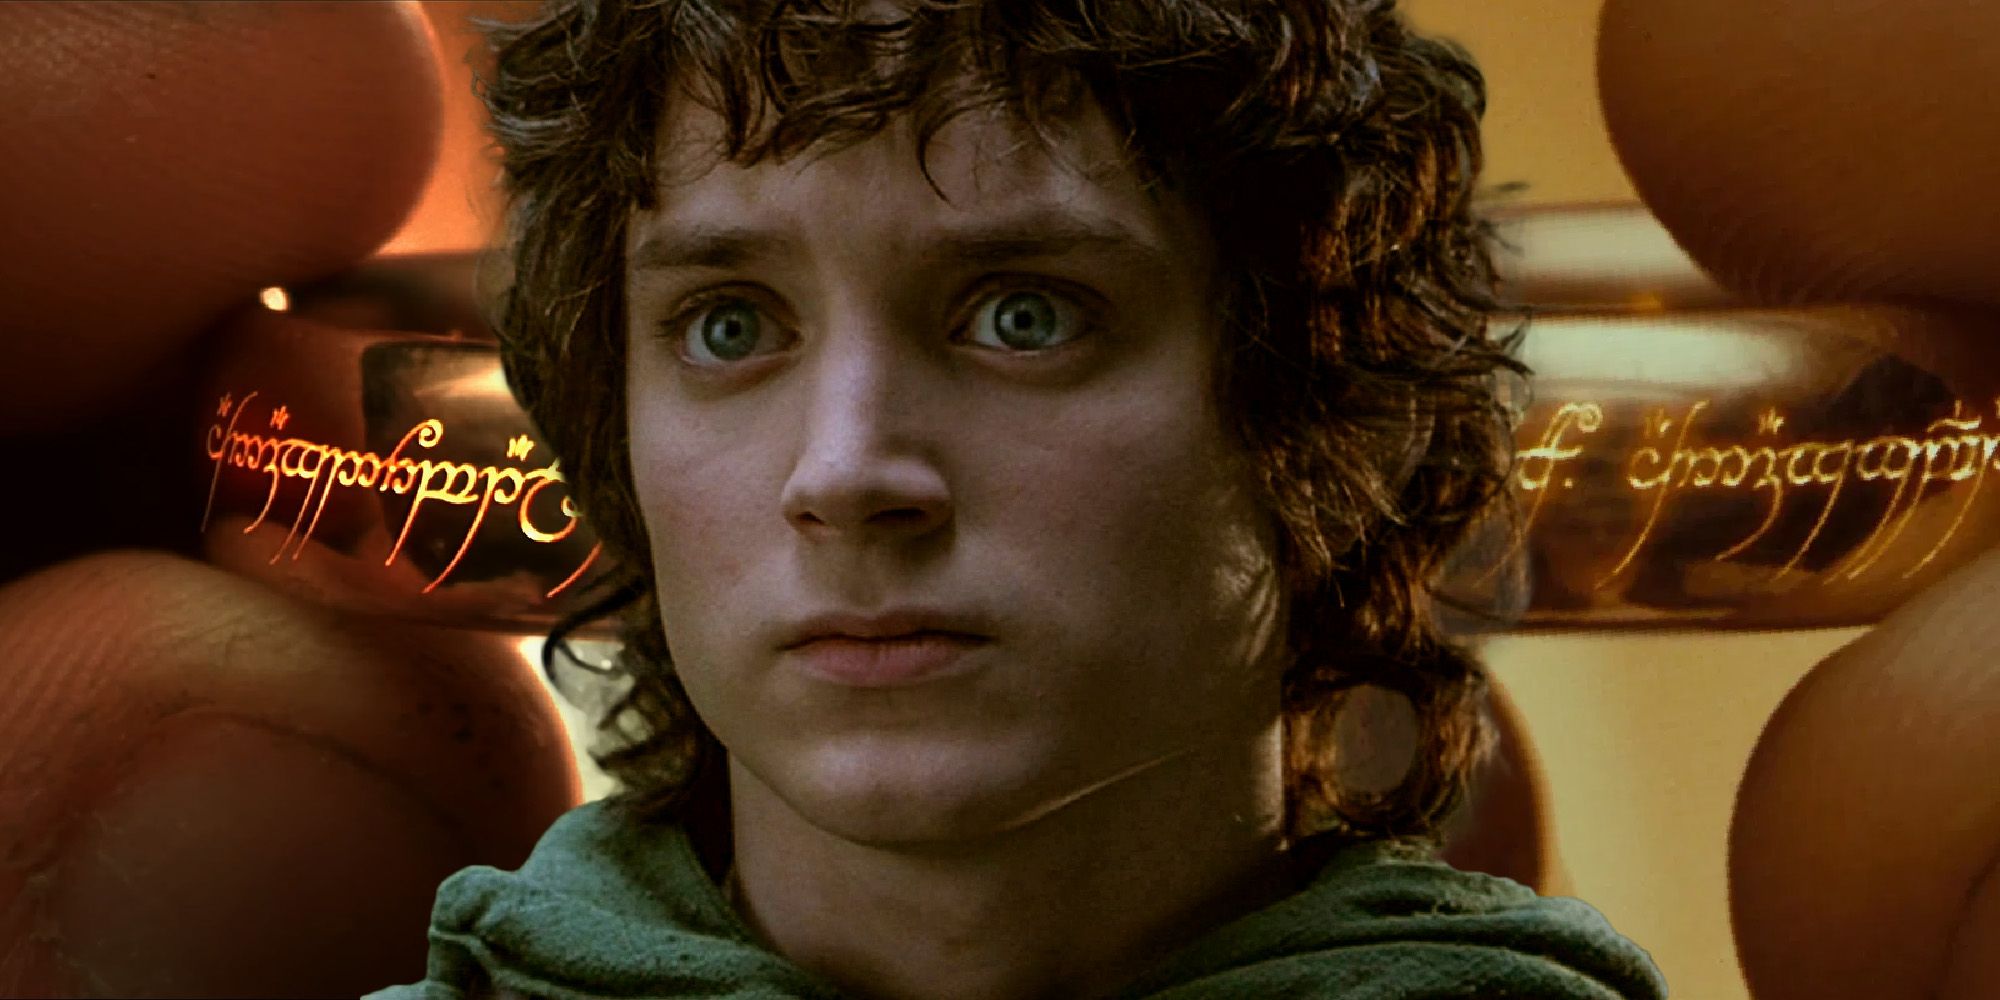 Frodo Baggins Lord of the rings the fellowship of the ring 4k vs hd